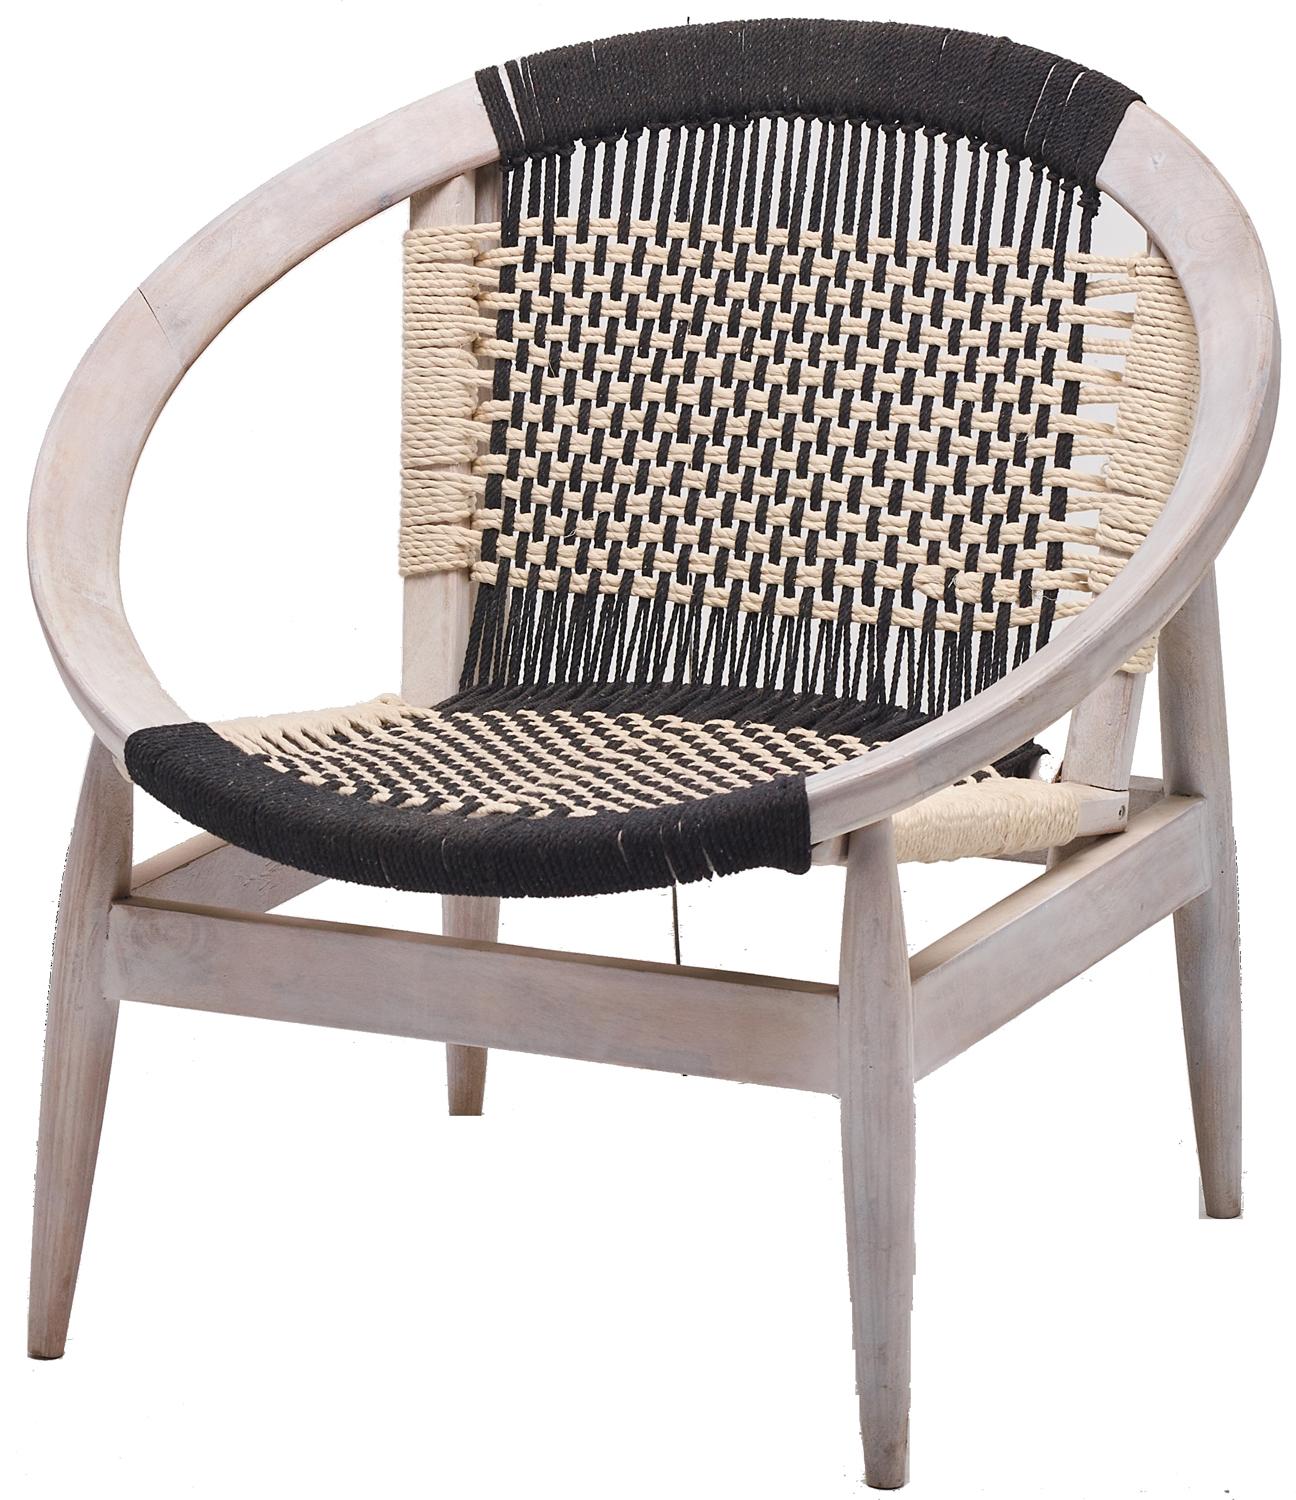 Transitional Chair CAC-81030 Fiona CAC-81030 in whitewash Cotton